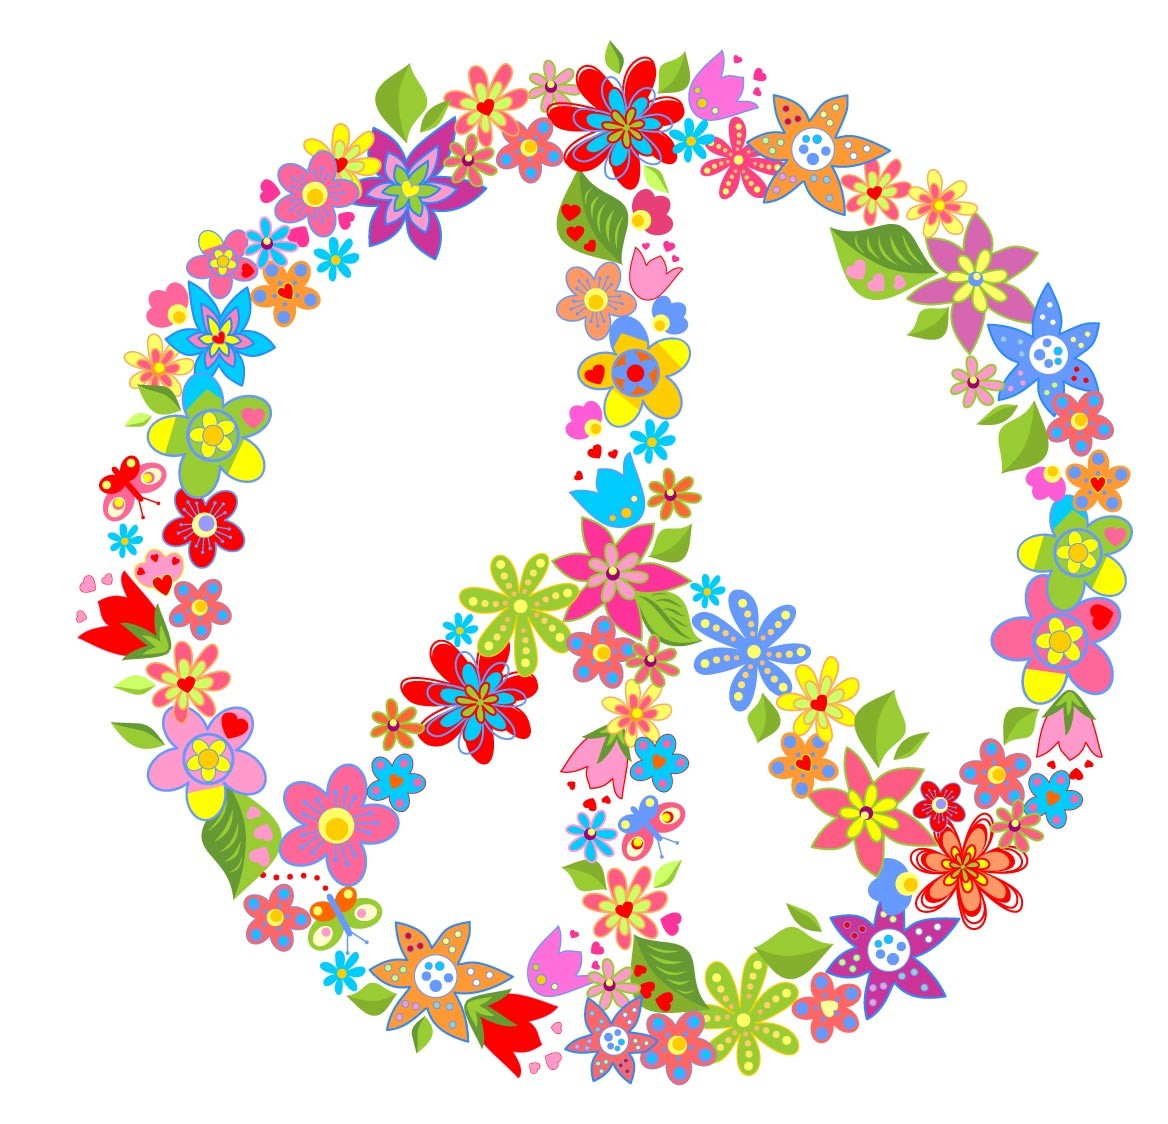 Popular items for floral peace sign on Etsy